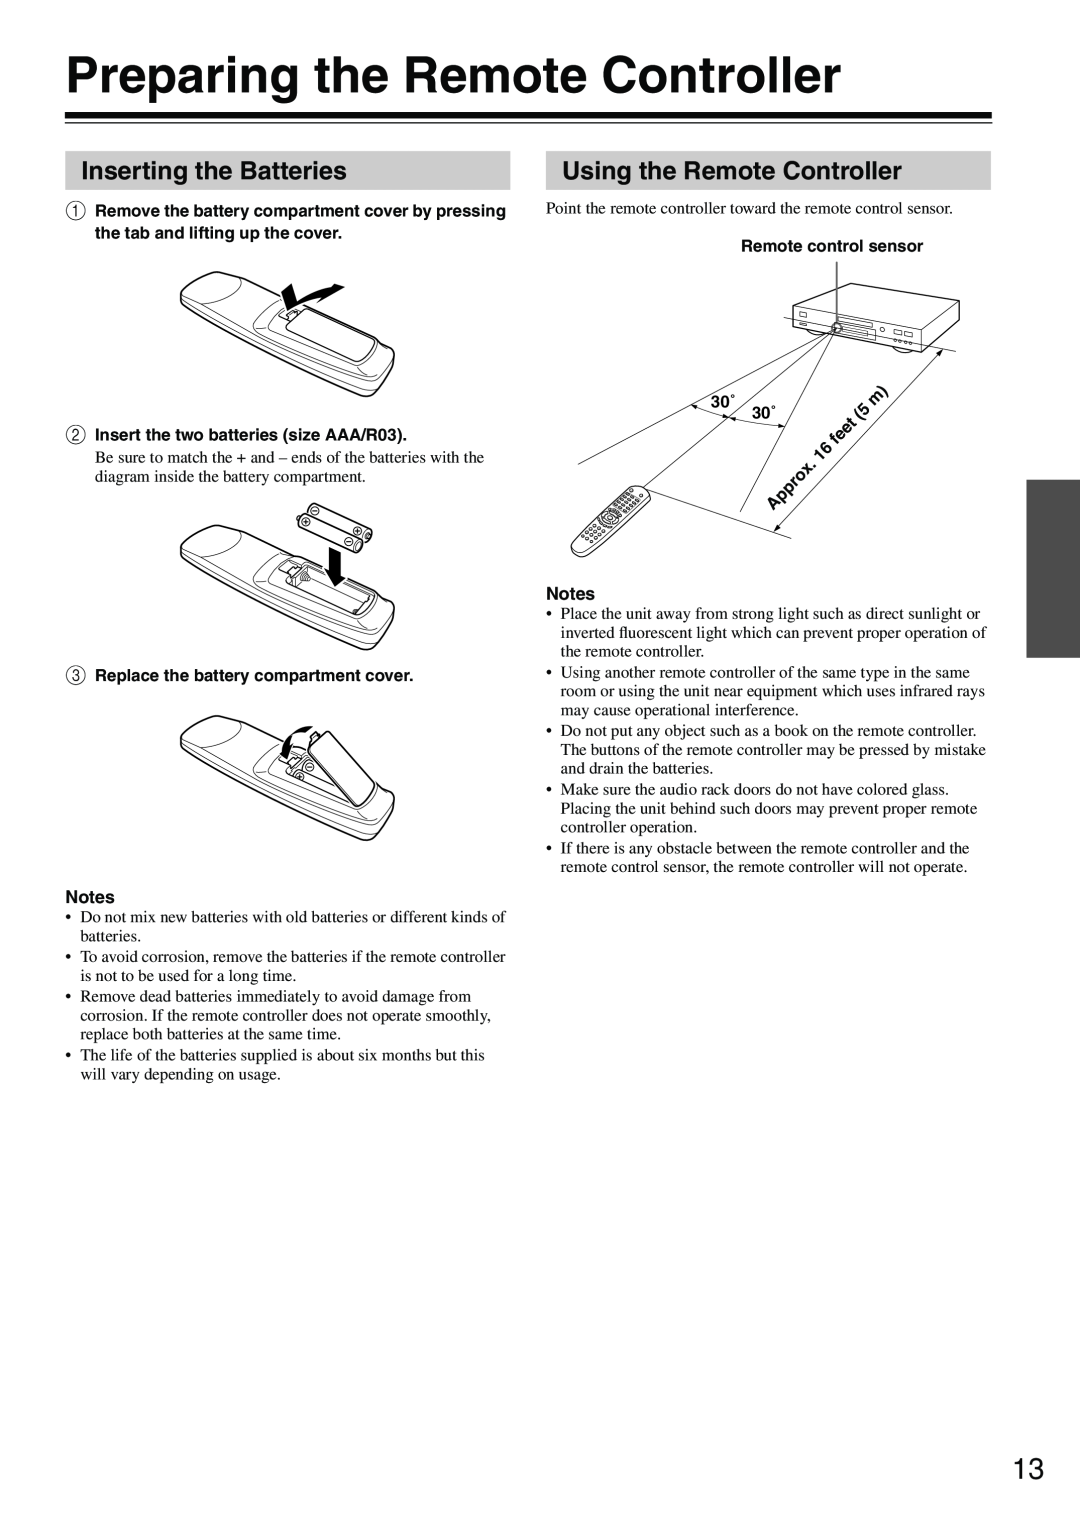 Onkyo DV-SP302 instruction manual Preparing the Remote Controller, Inserting the Batteries, Using the Remote Controller 